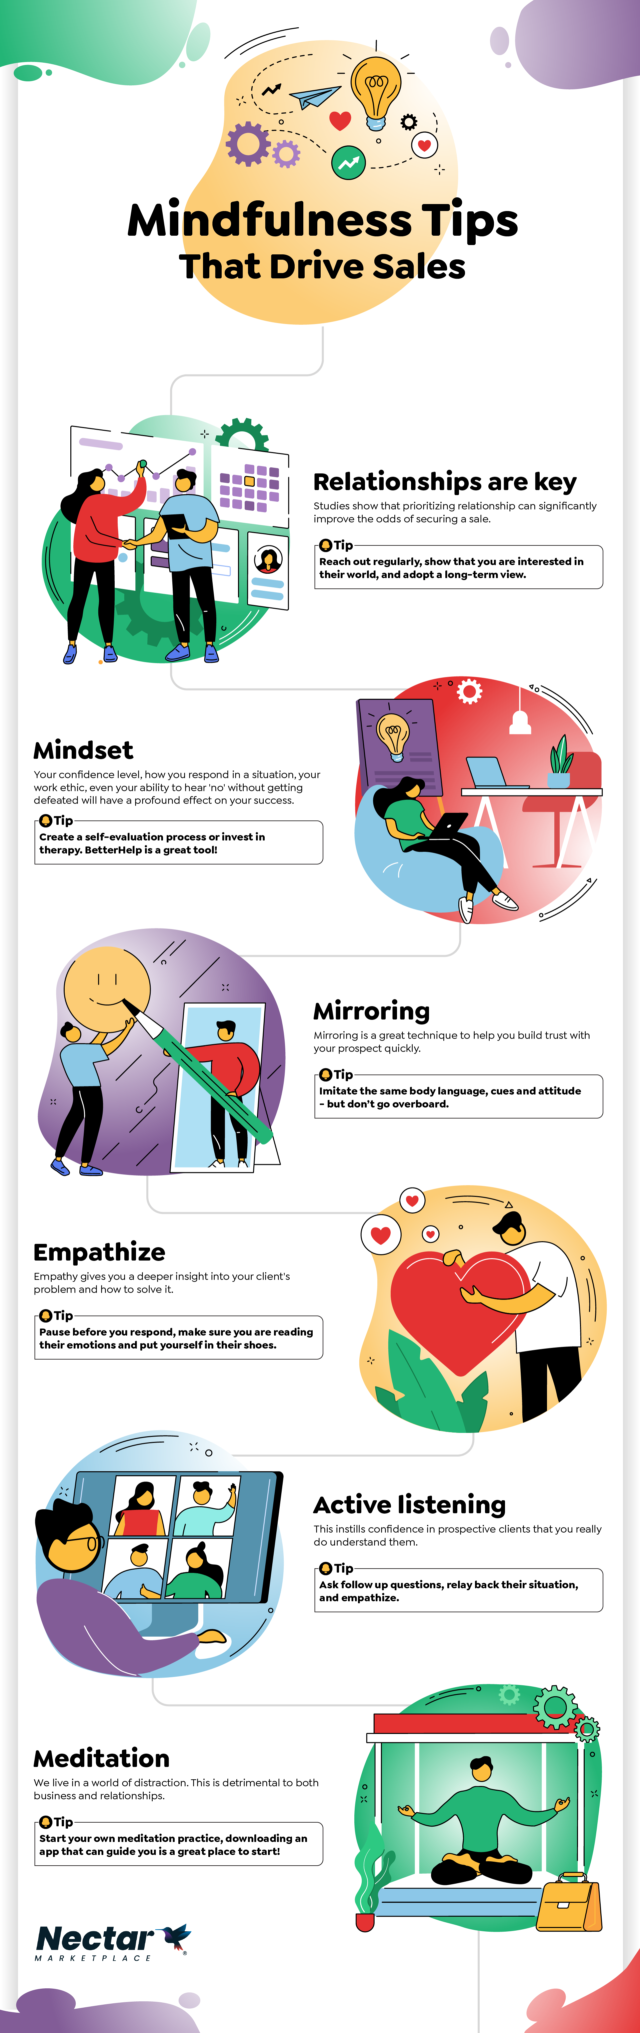 Mindfulness tips infographic